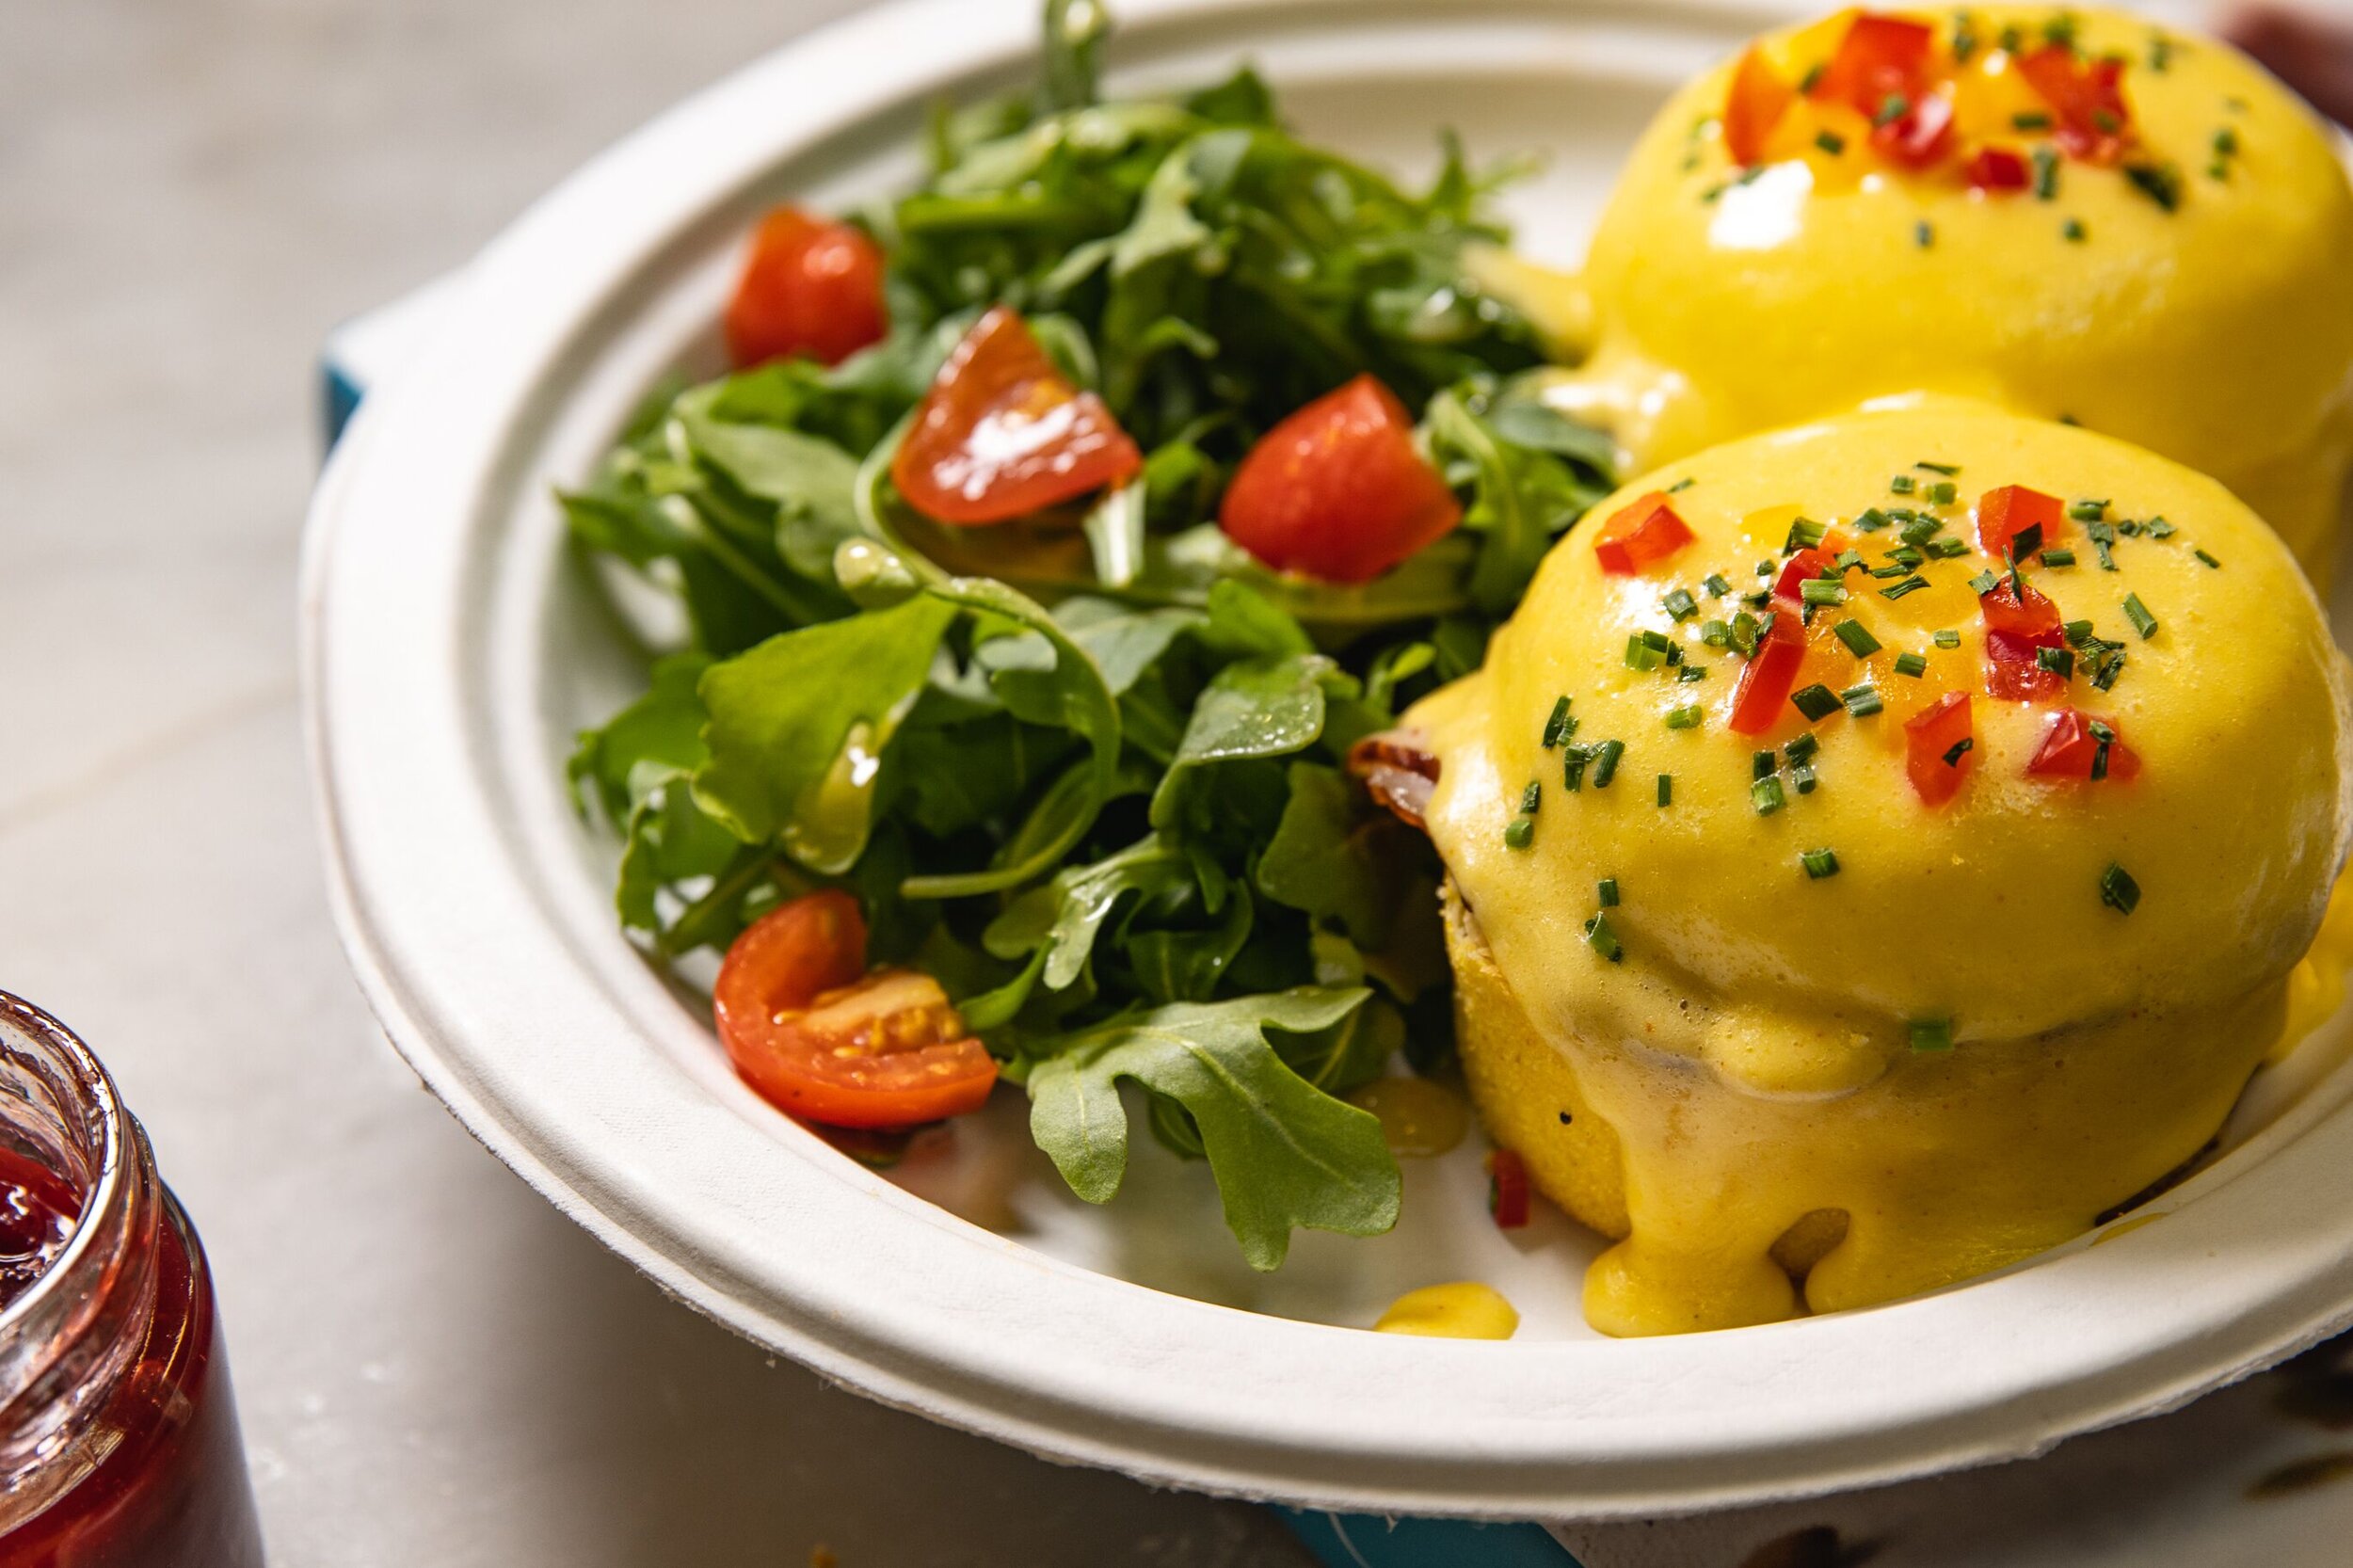 eggs Benedict with a side salad